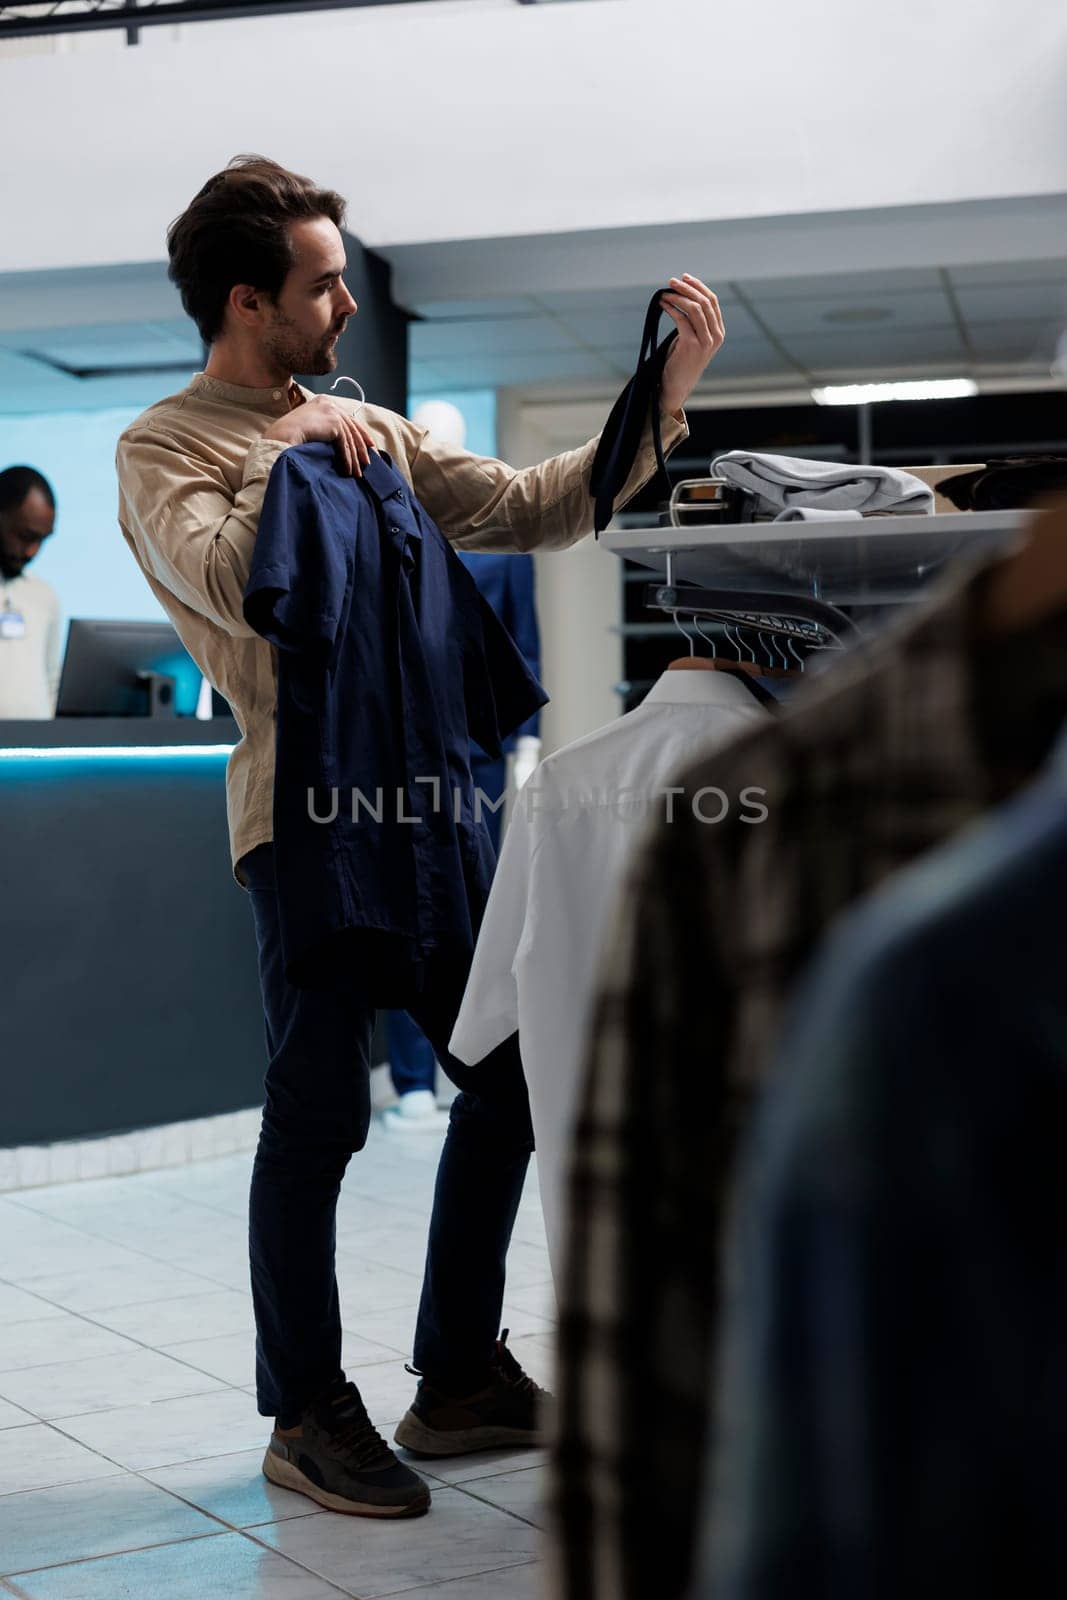 Client examining tie and shirt style while choosing formal outfit in shopping mal menswear department. Young caucasian man holding apparel and accessory in fashion clothing store